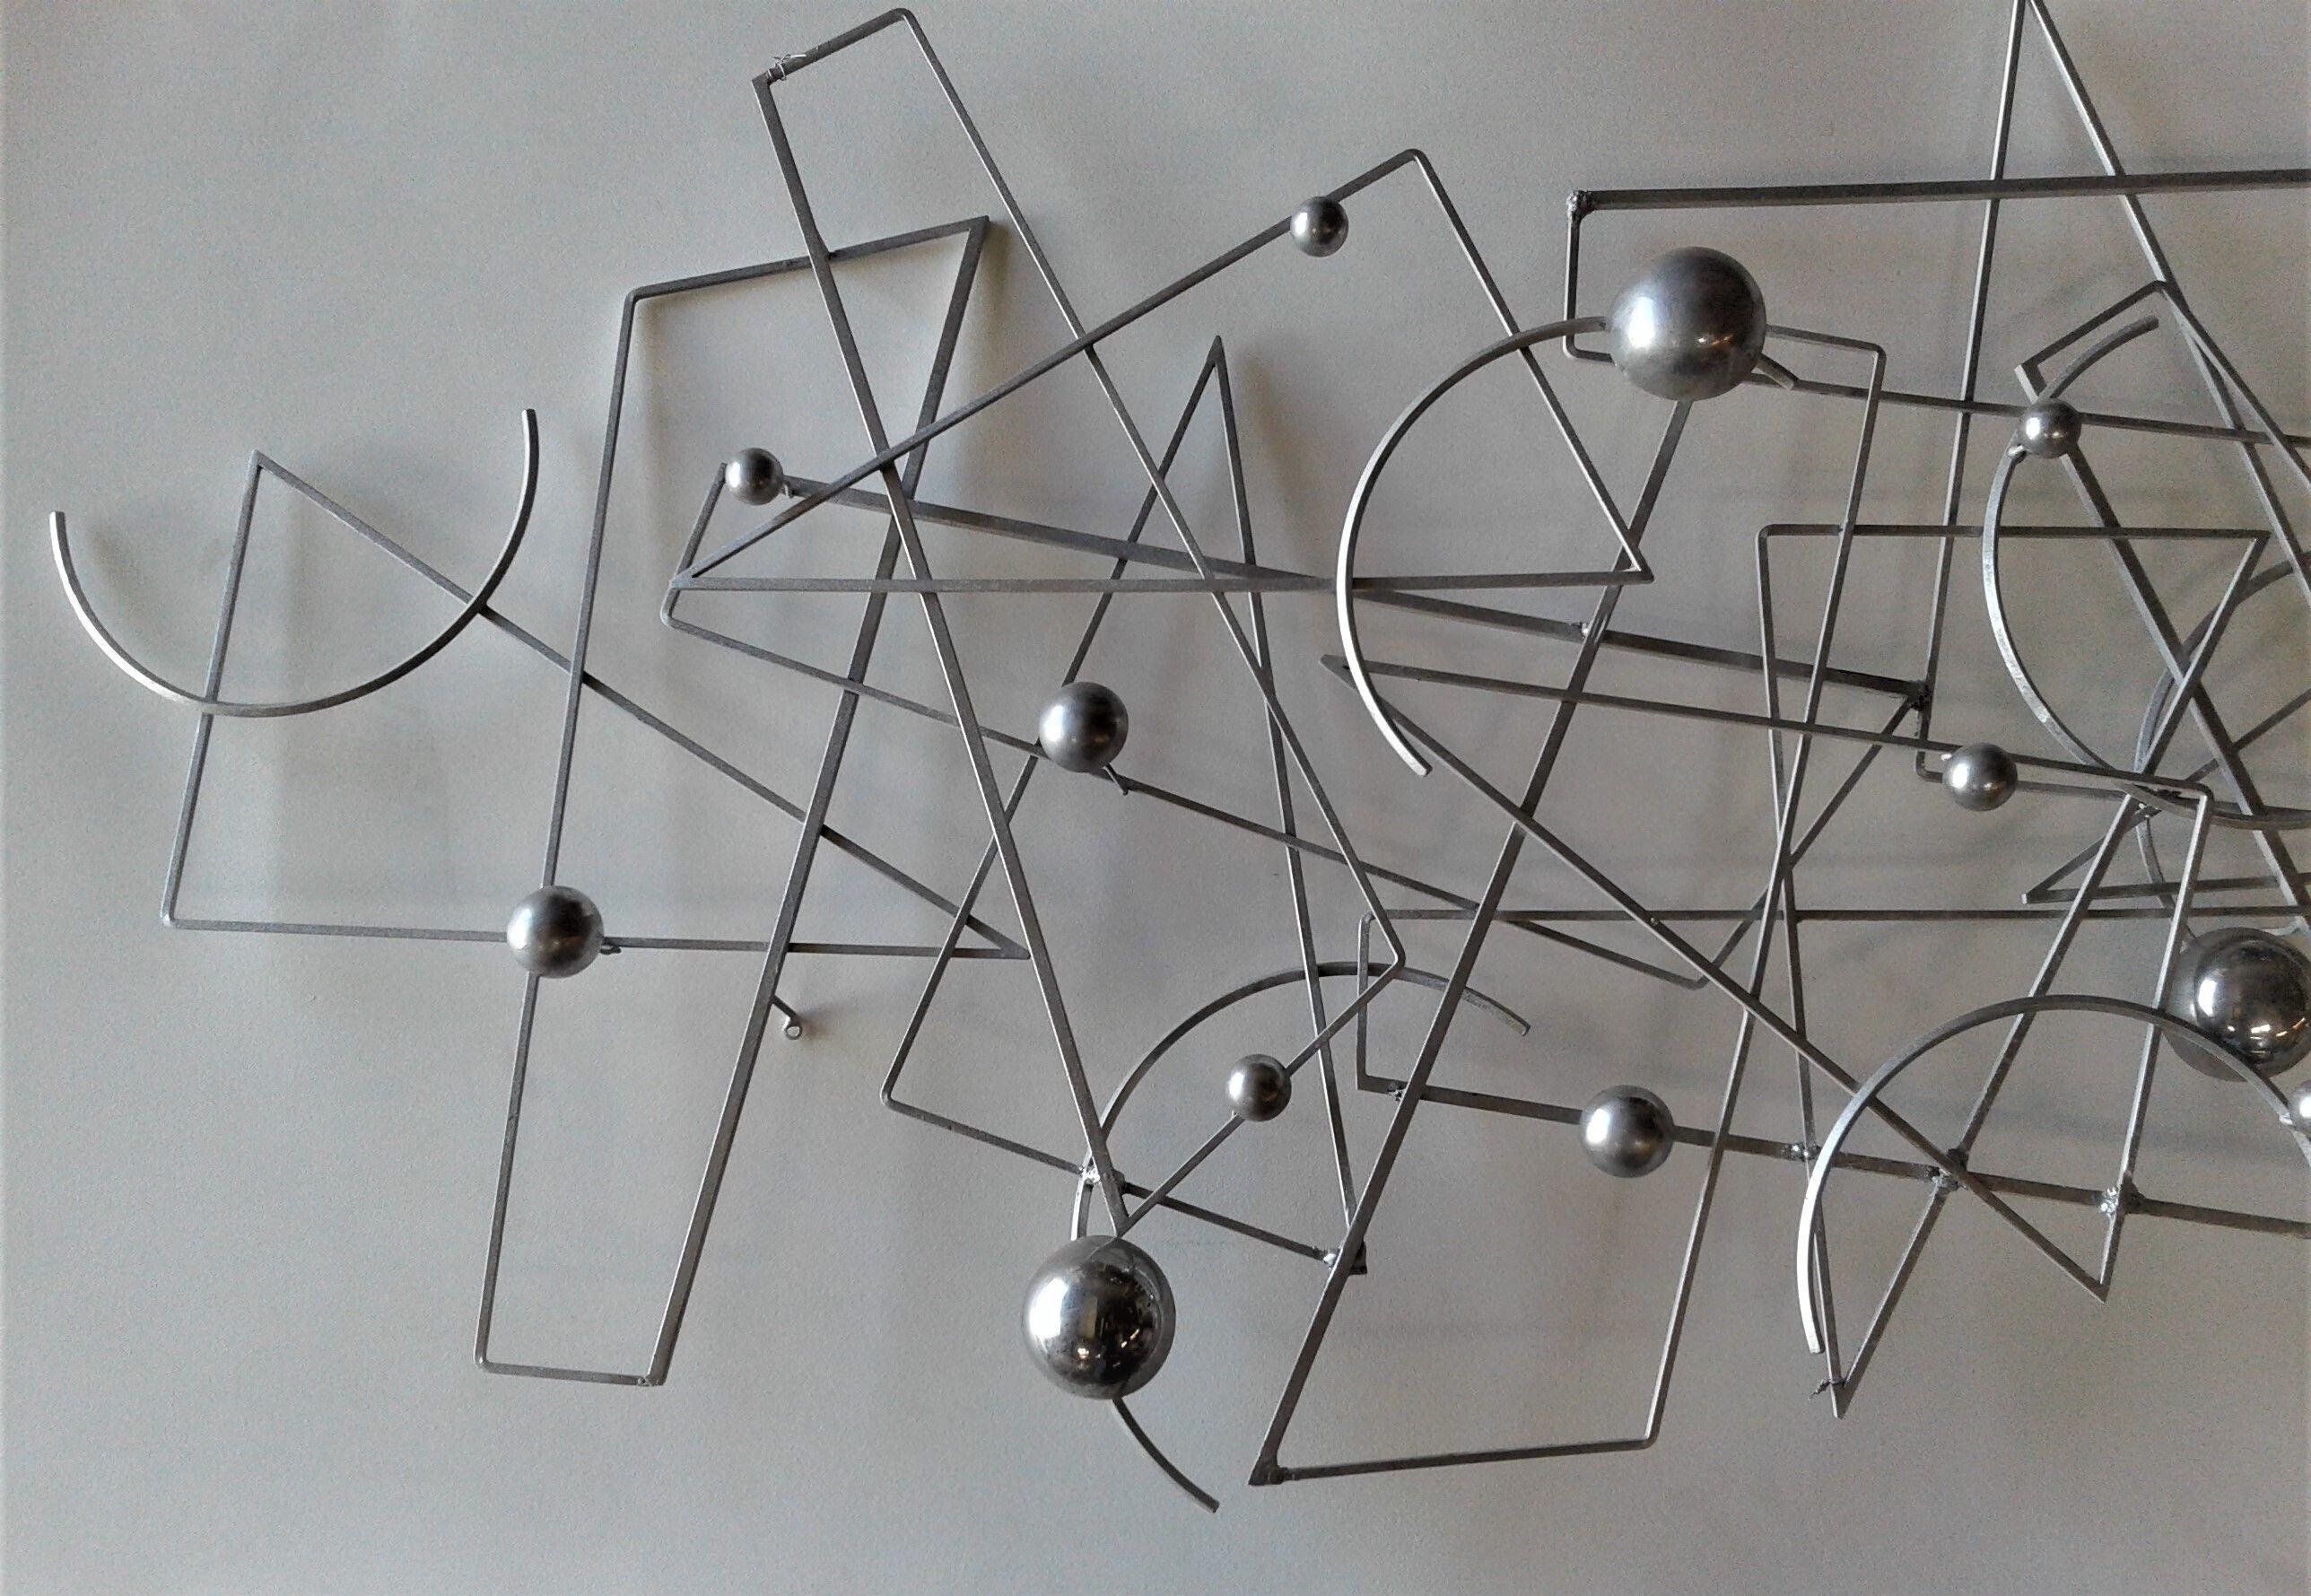 Large wall sculpture in the style of Curtis Jere made of silver faux welded metal. A great addition to modernist wall space in any household.